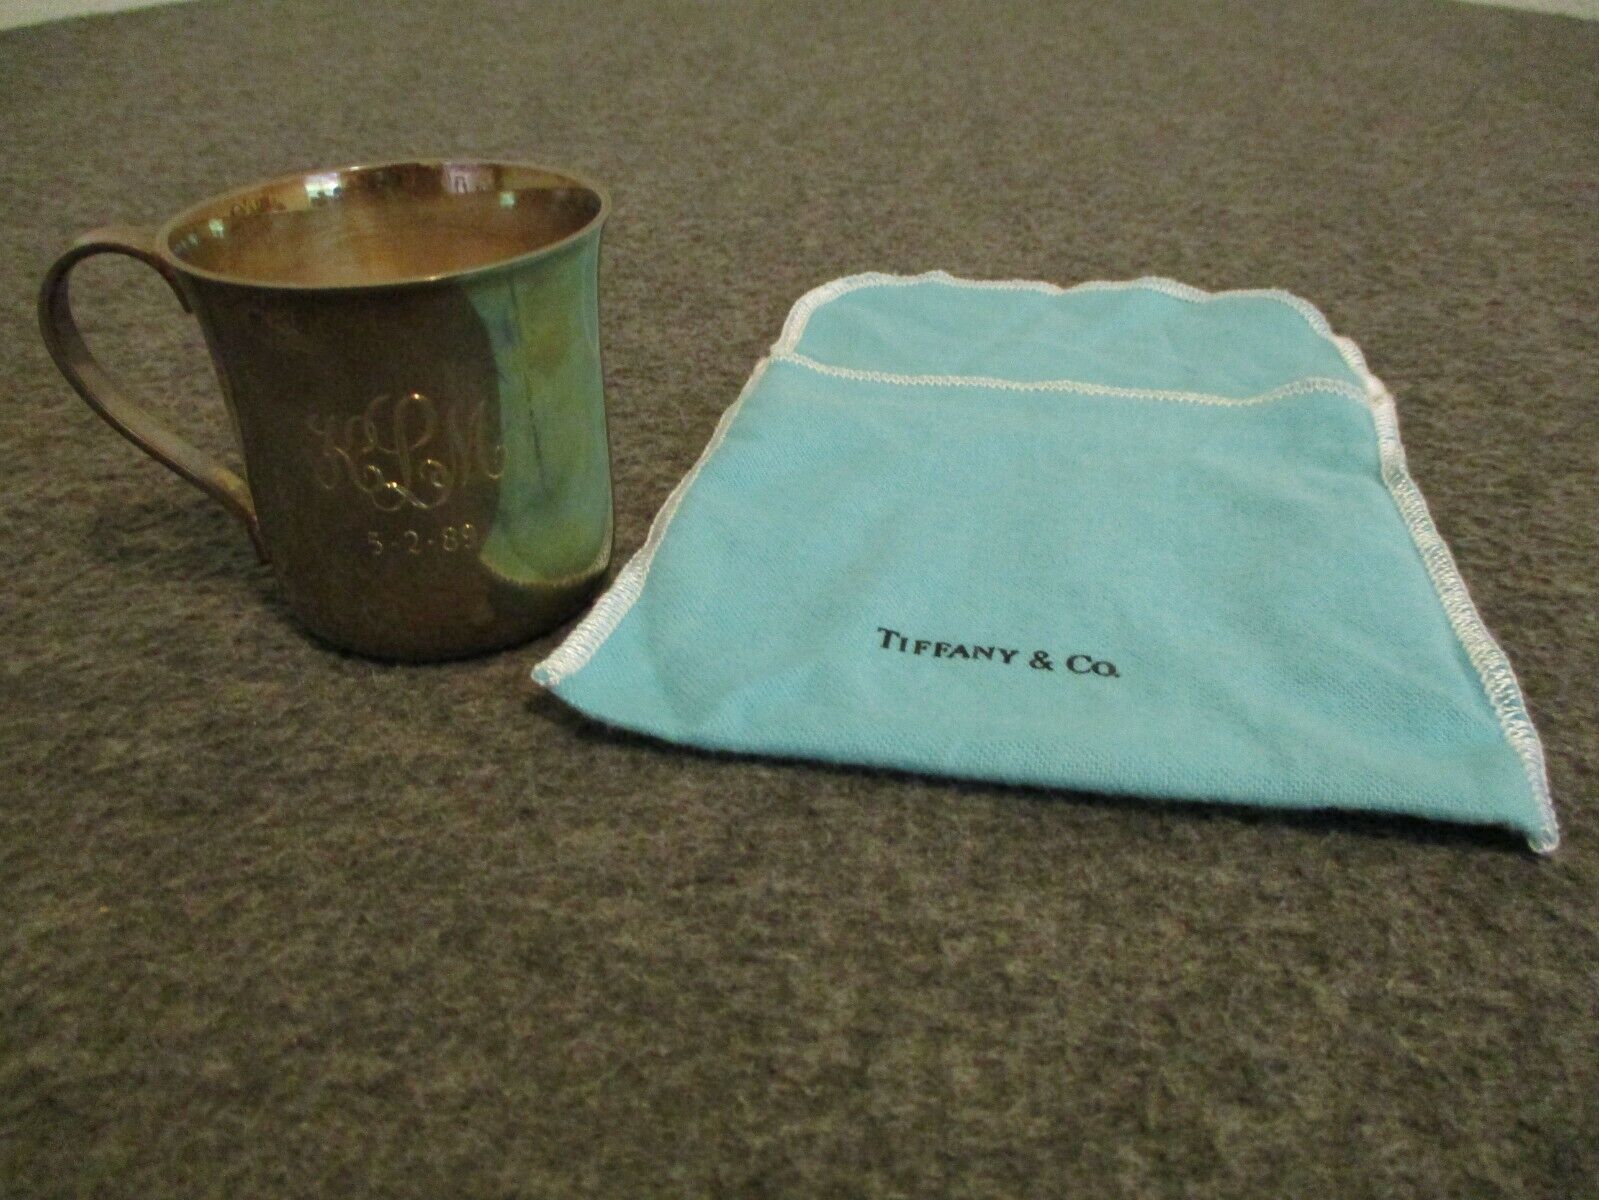 TIFFANY & CO. STERLING SILVER BABY CUP + POUCH 23245 CHRISTENING CUP 98g- W/MONO